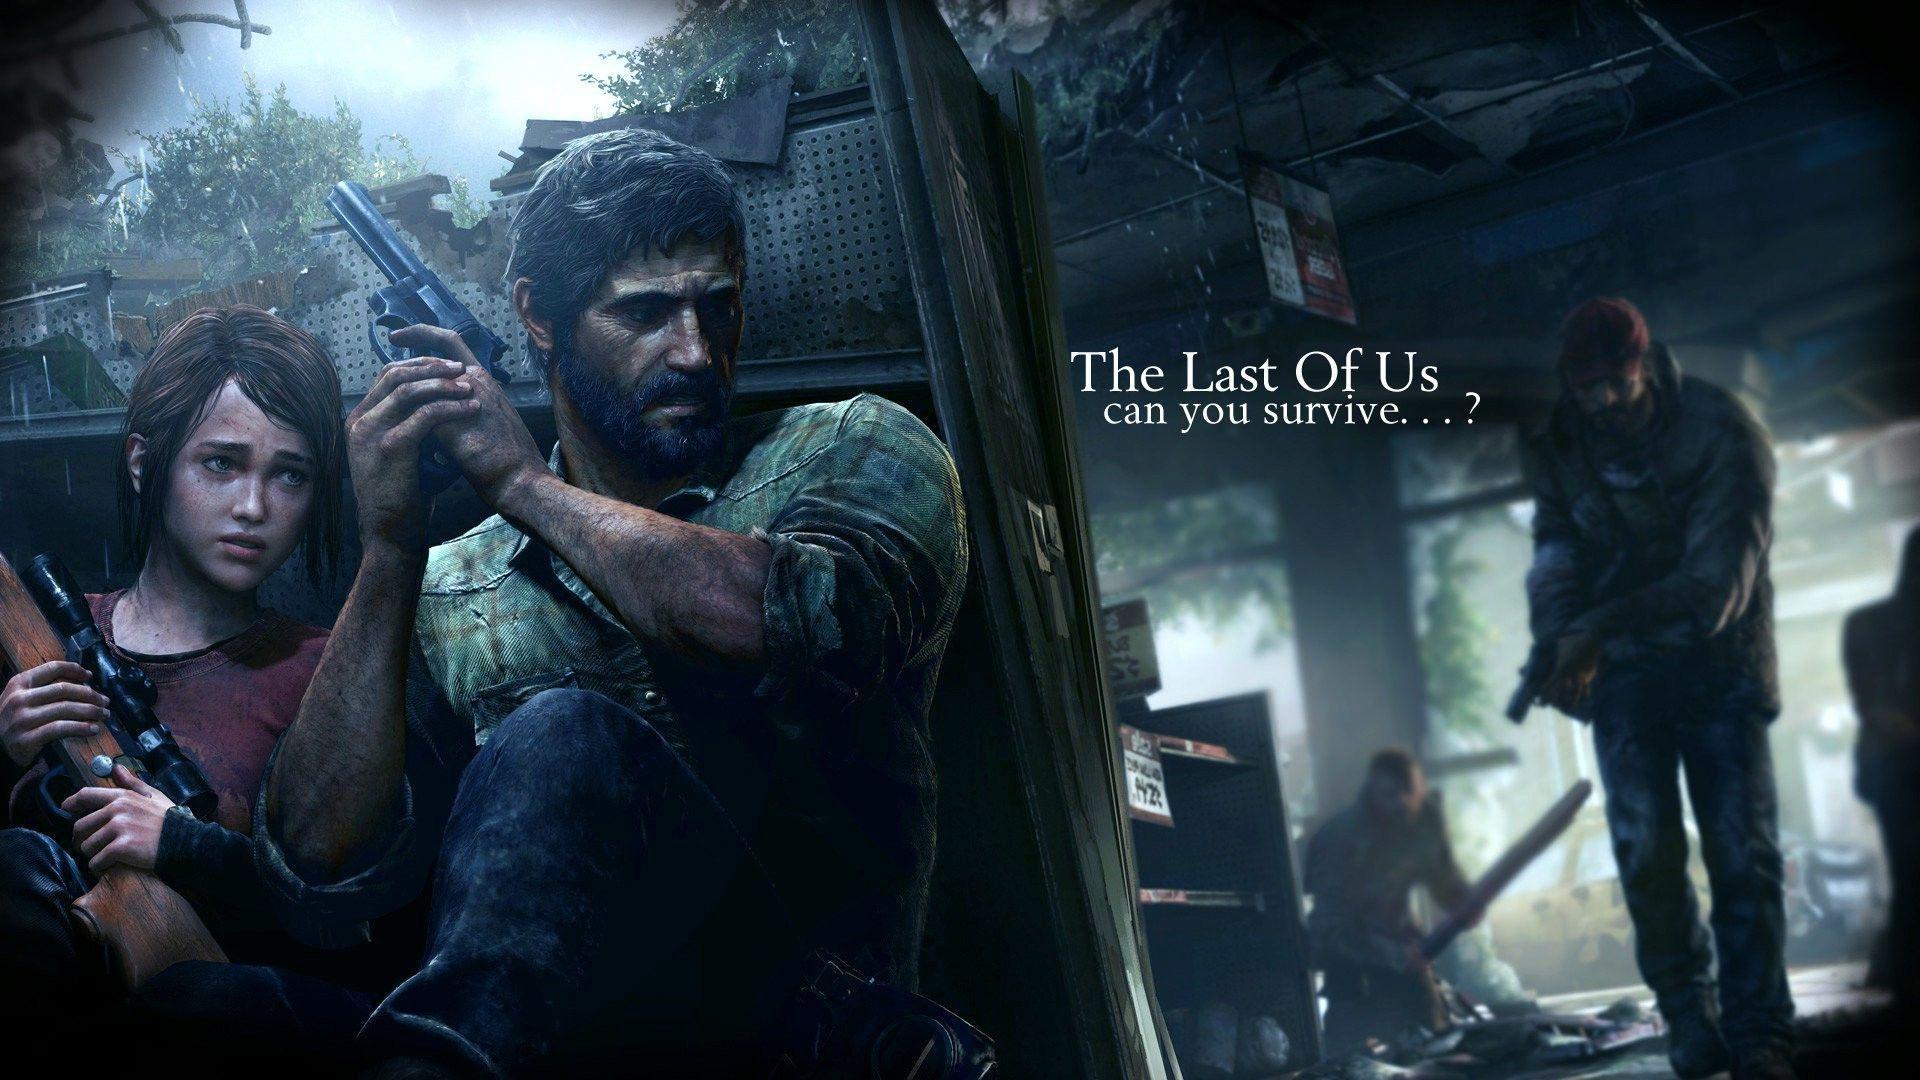 1920 x 1080 · jpeg - The Last Of Us 2 Wallpapers - Wallpaper Cave